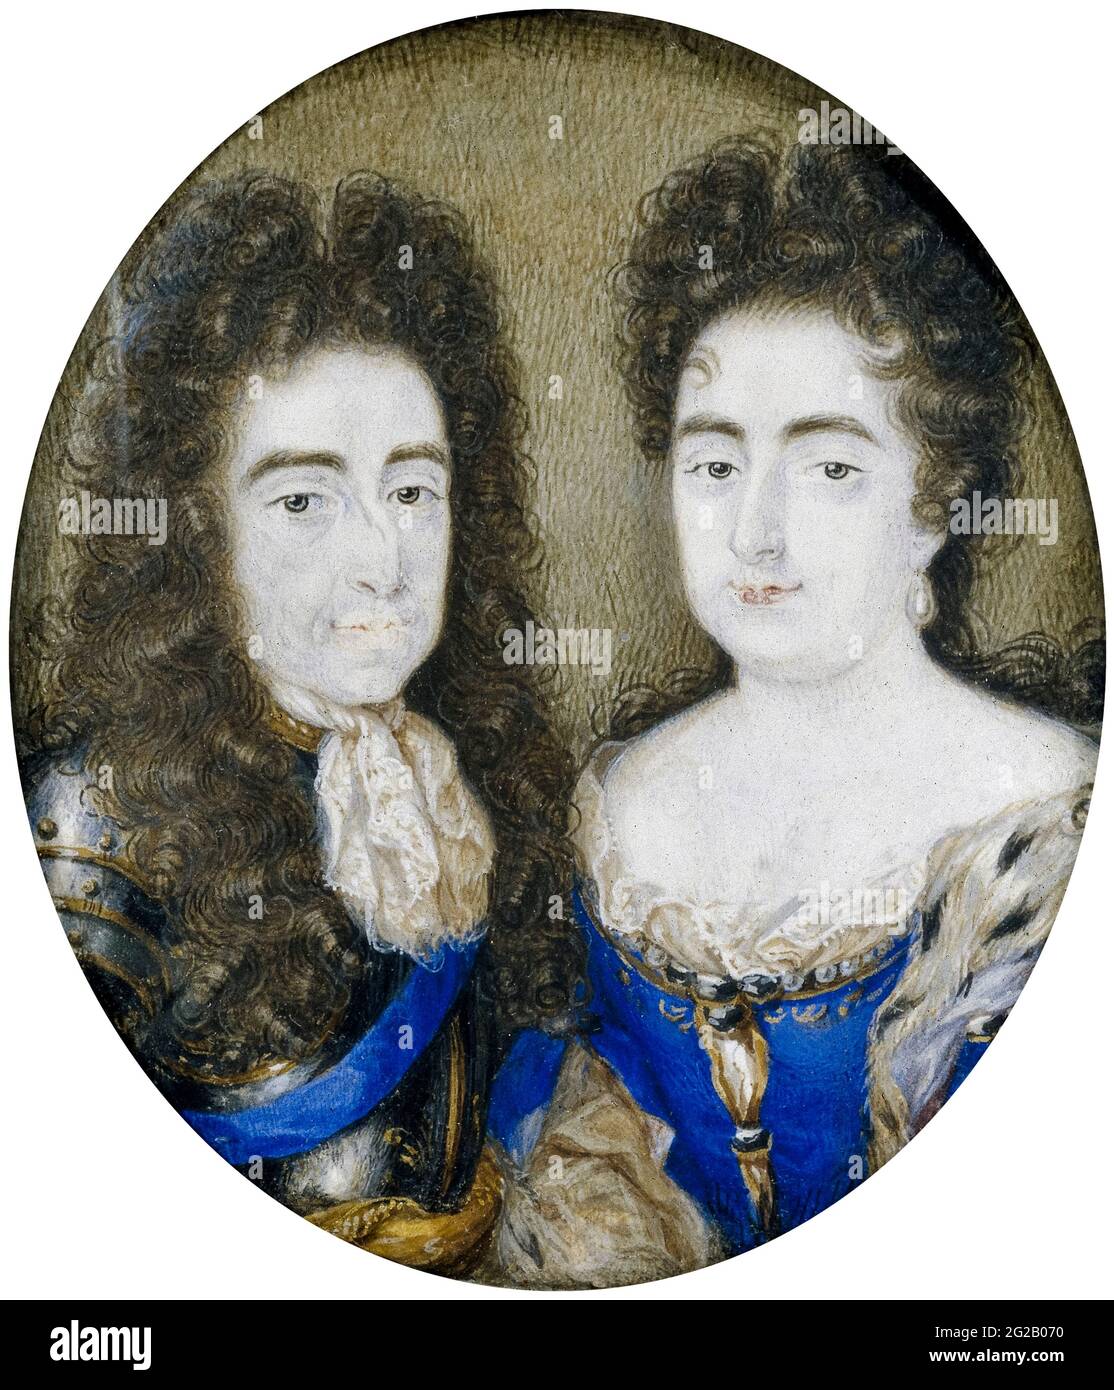 William and Mary: William III (1650-1702) Prince of Orange and King of England (1689-1702) with his wife Maria Stuart (1662-1694) Queen Mary II of England (1689-1694), portrait miniature by Peter Hoadly, 1700-1750 Stock Photo